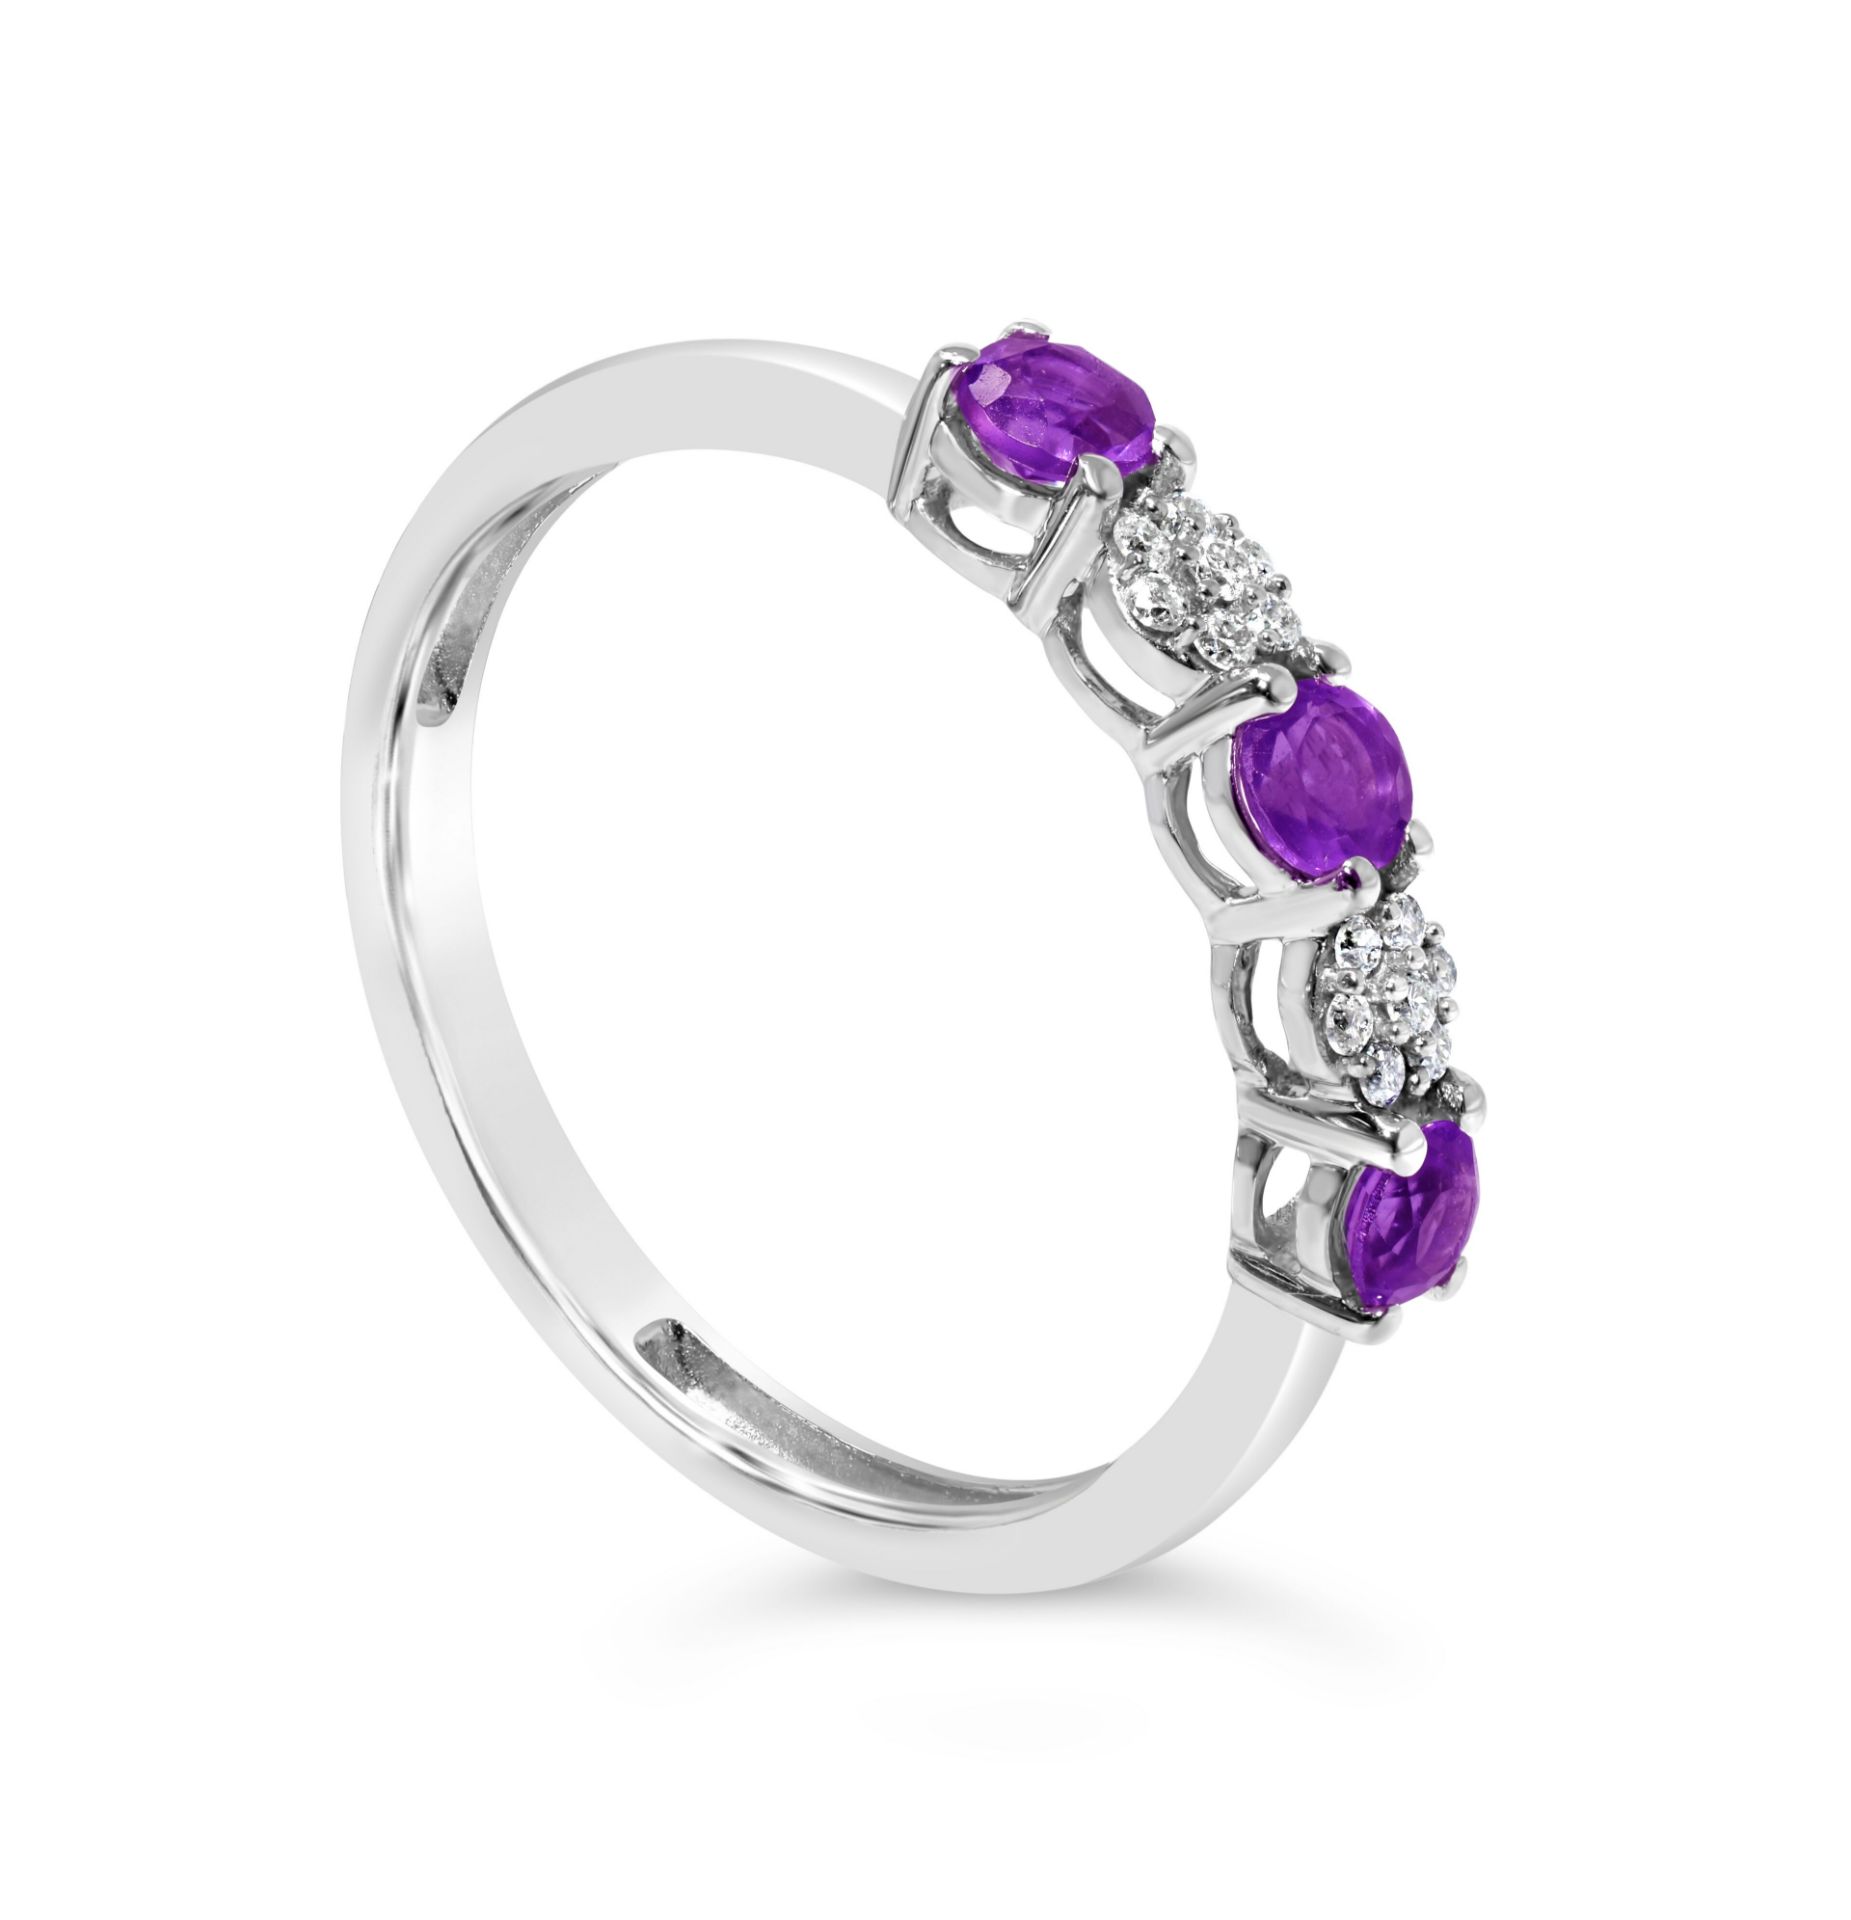 Amethyst and Diamond Eternity Ring, Metal 9ct White Gold, Weight (g) 1.48, Diamond Weight (ct) 0.07, - Image 2 of 4